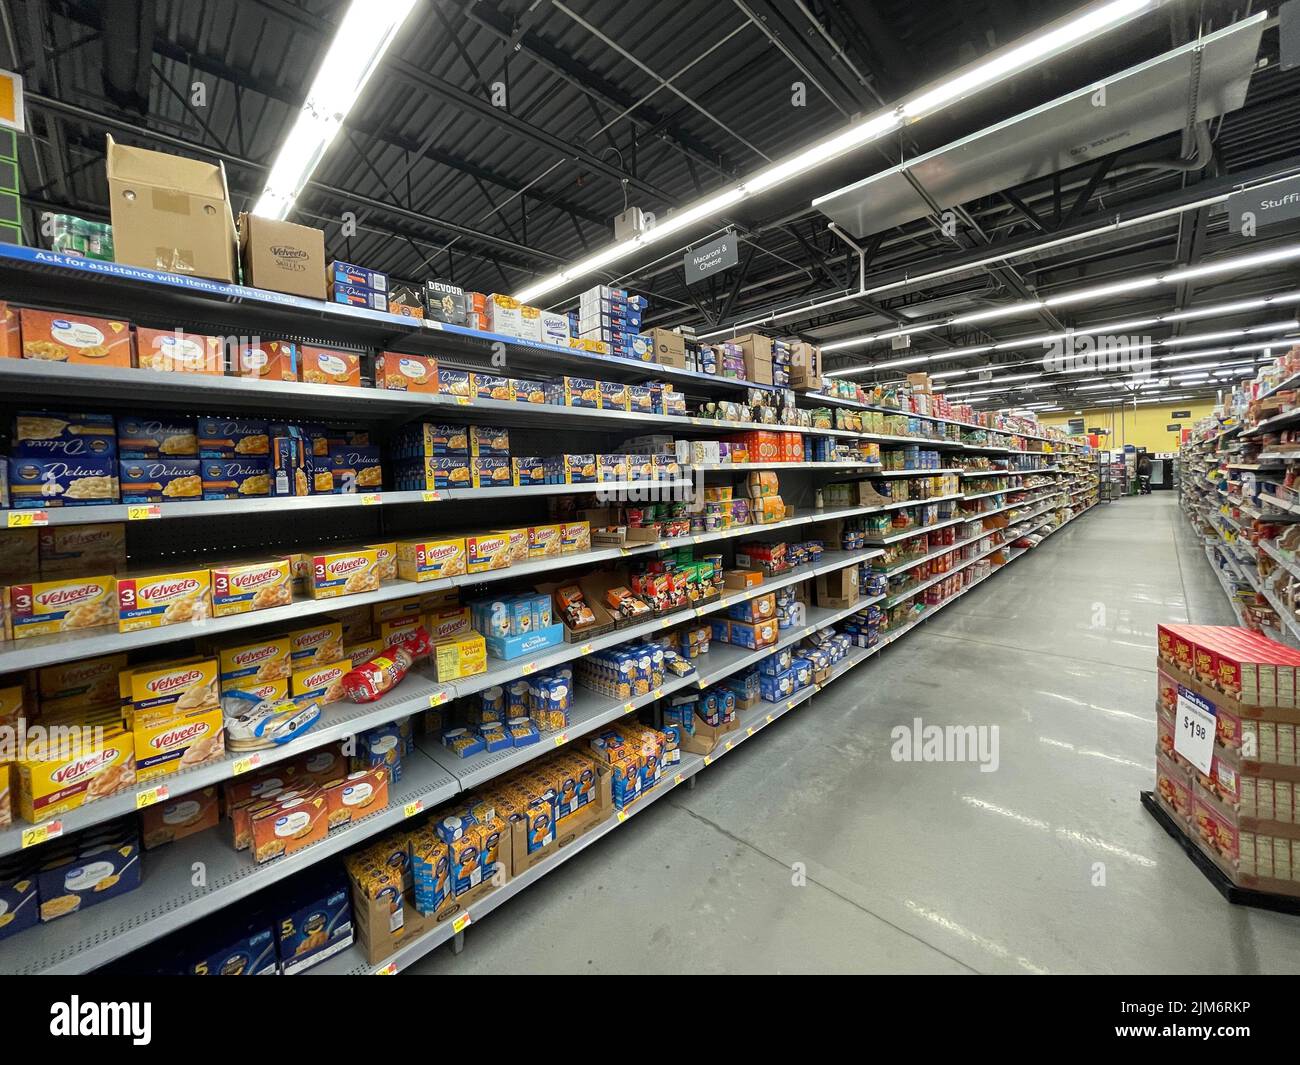 Augusta, Ga USA - 11 28 21: Walmart grocery store interior pasta section and Stove Top display Stock Photo